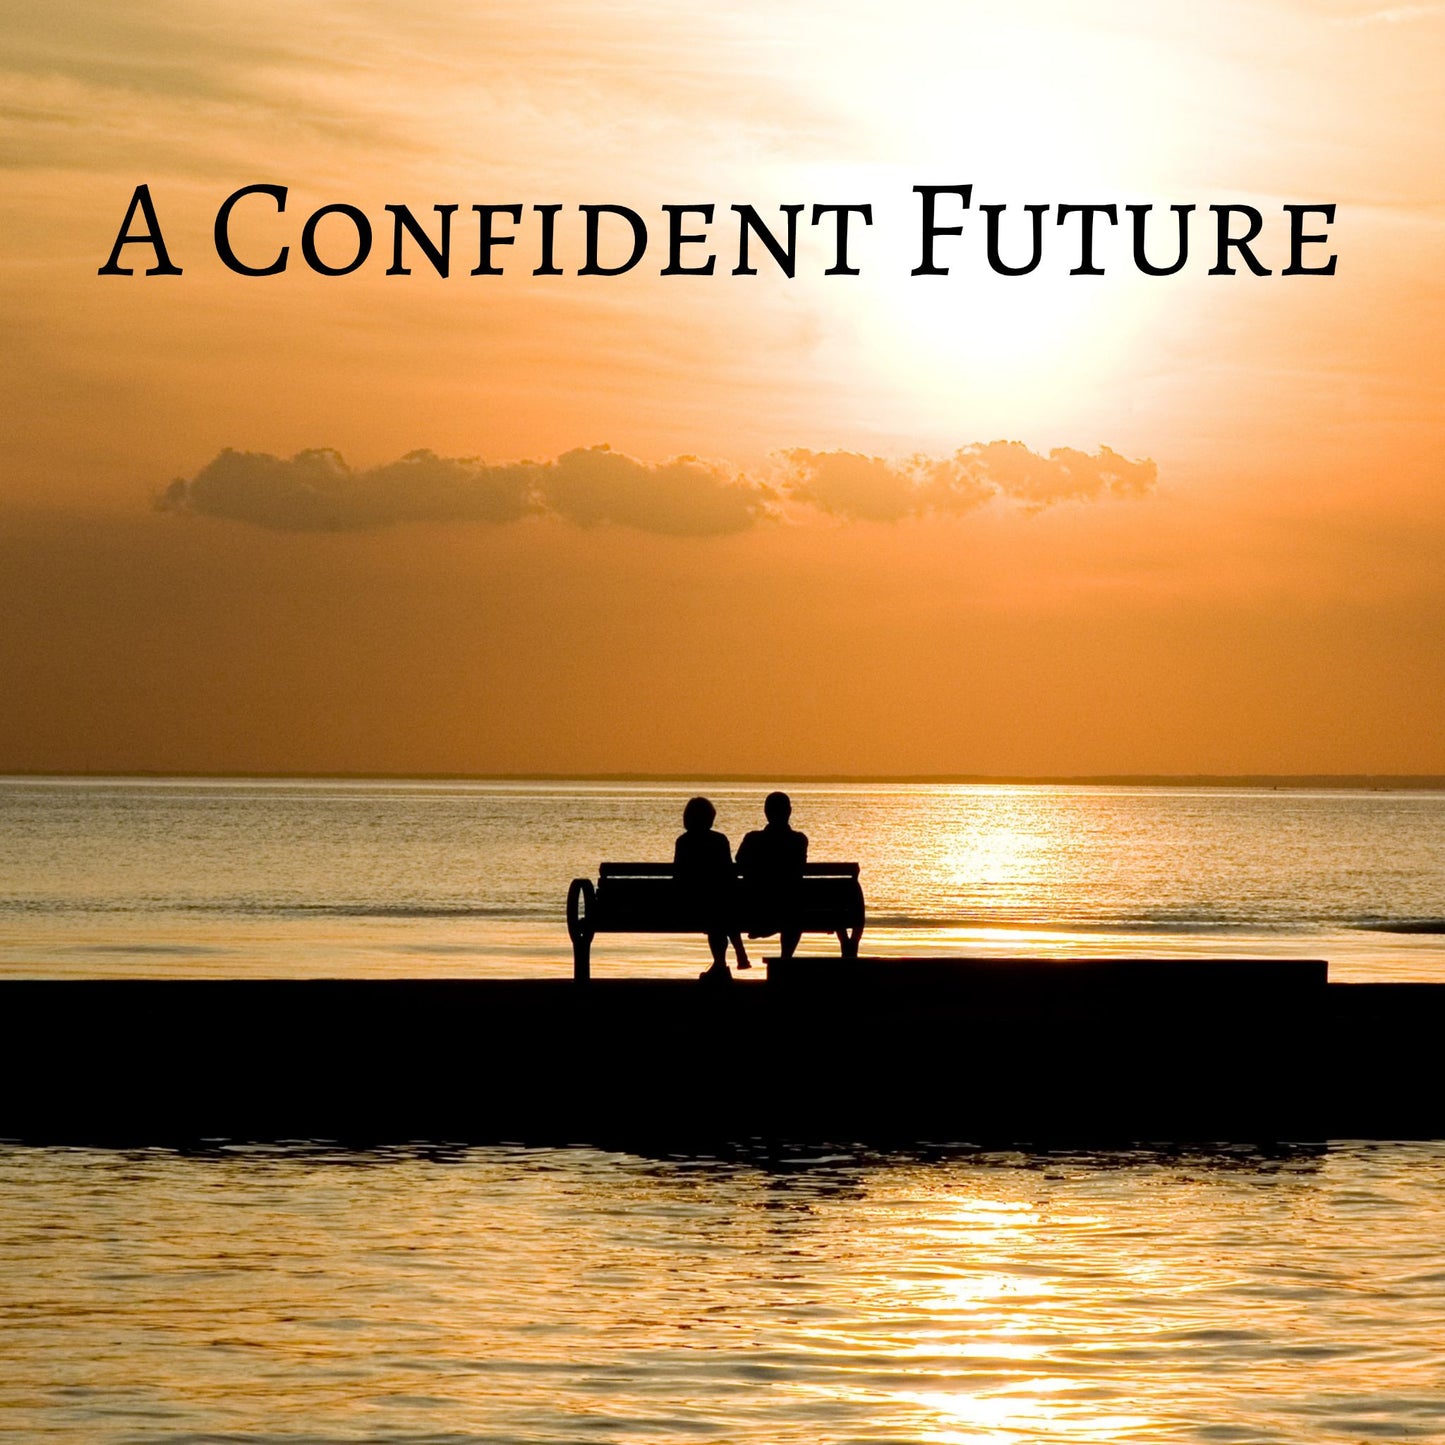 CD Cover of song A Confident Future